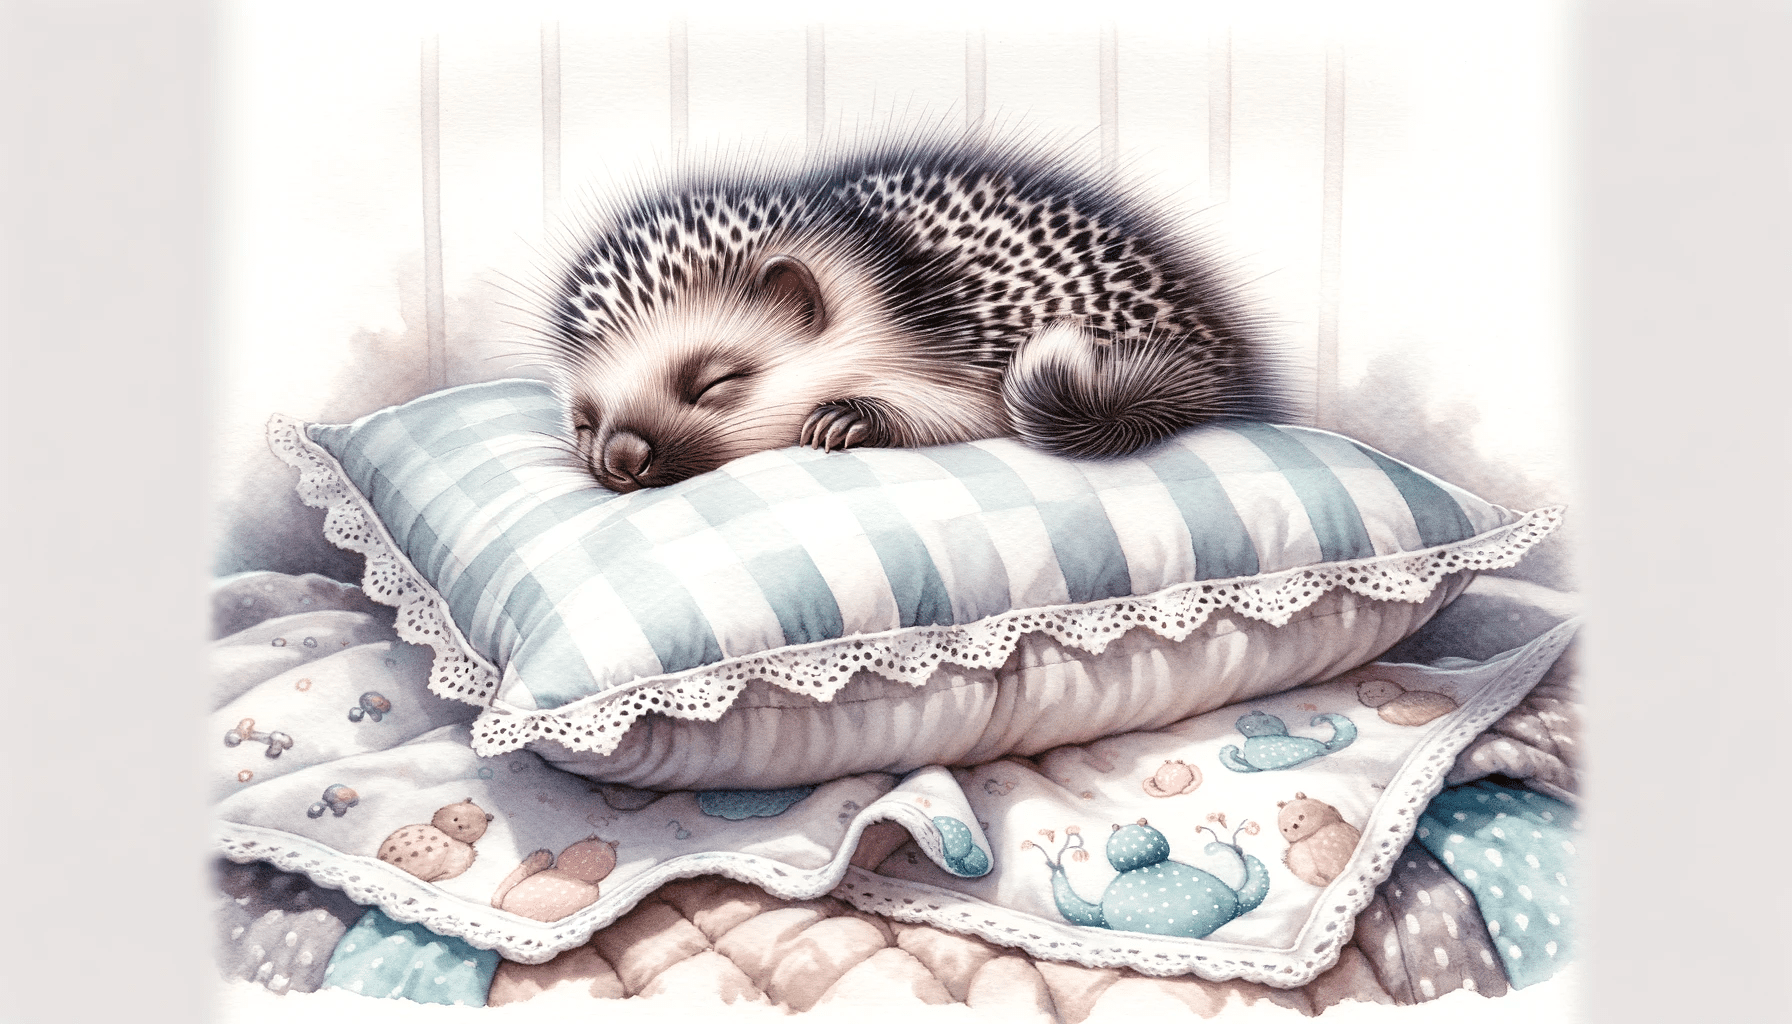 Baby Porcupine Sleeping on a Pillow Painting